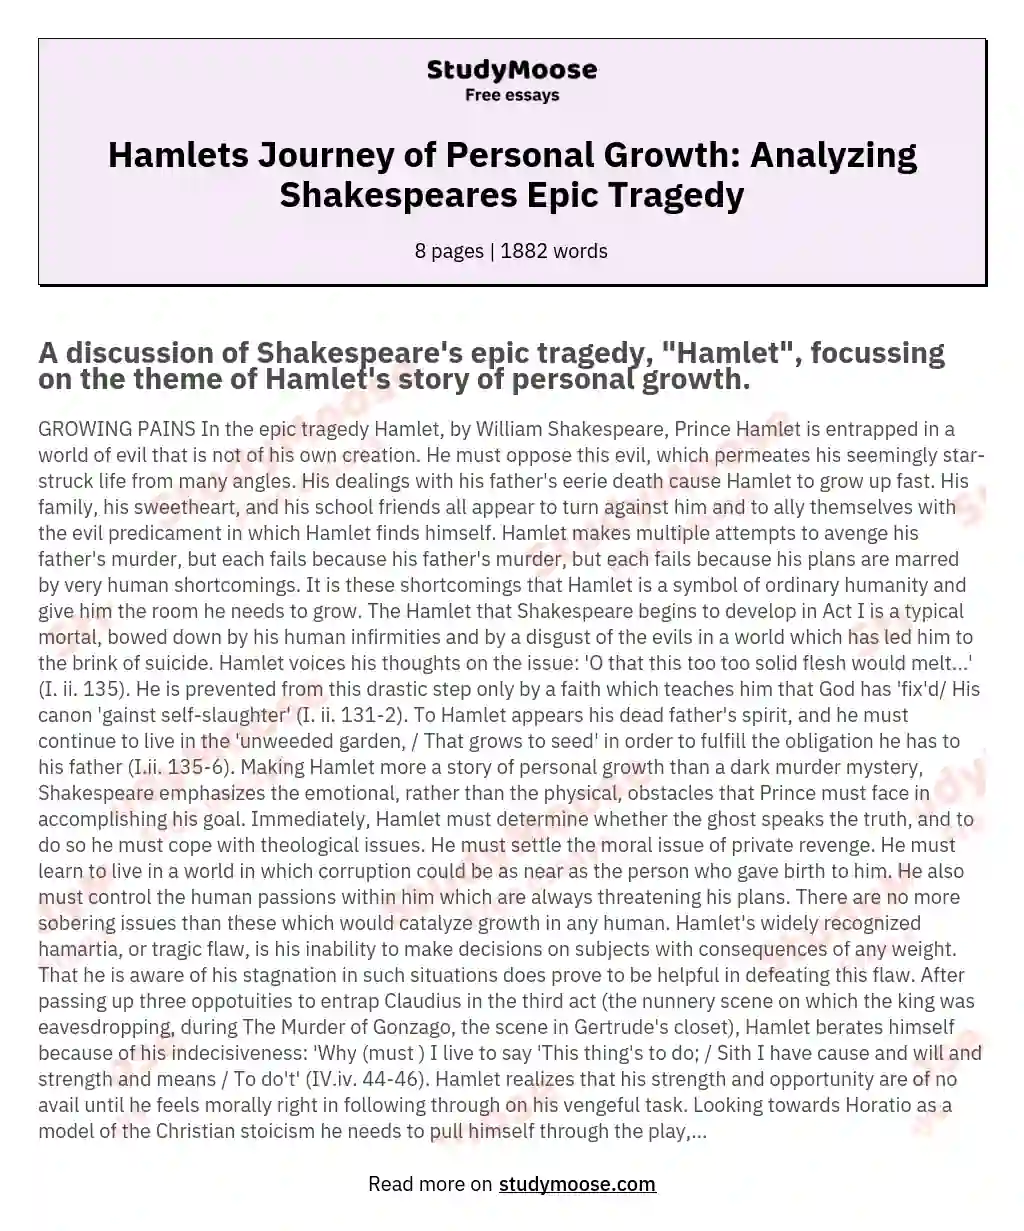 Hamlets Journey of Personal Growth: Analyzing Shakespeares Epic Tragedy essay